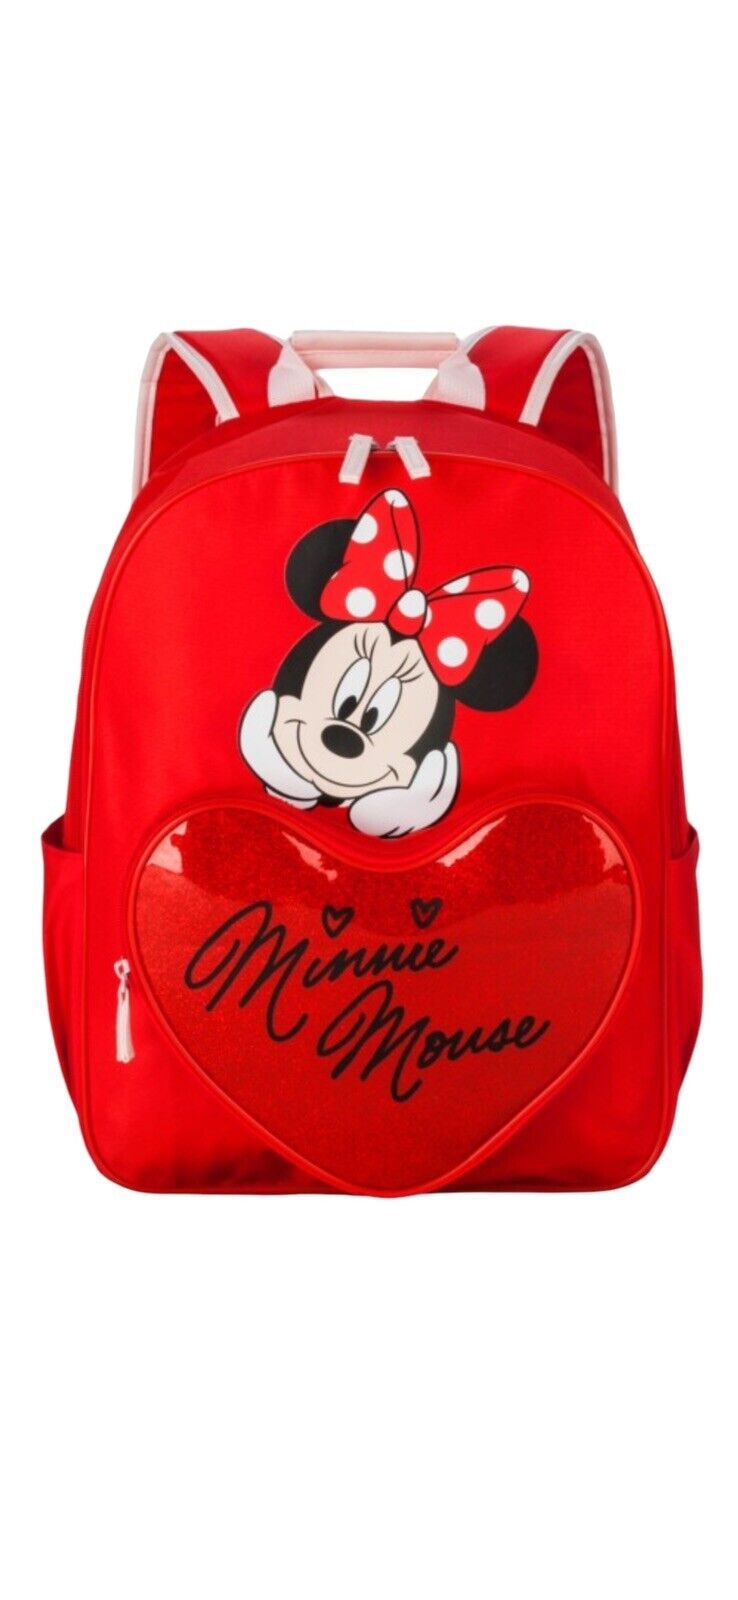 Disney Minnie Mouse Heart Print Backpack  Ted Disney New